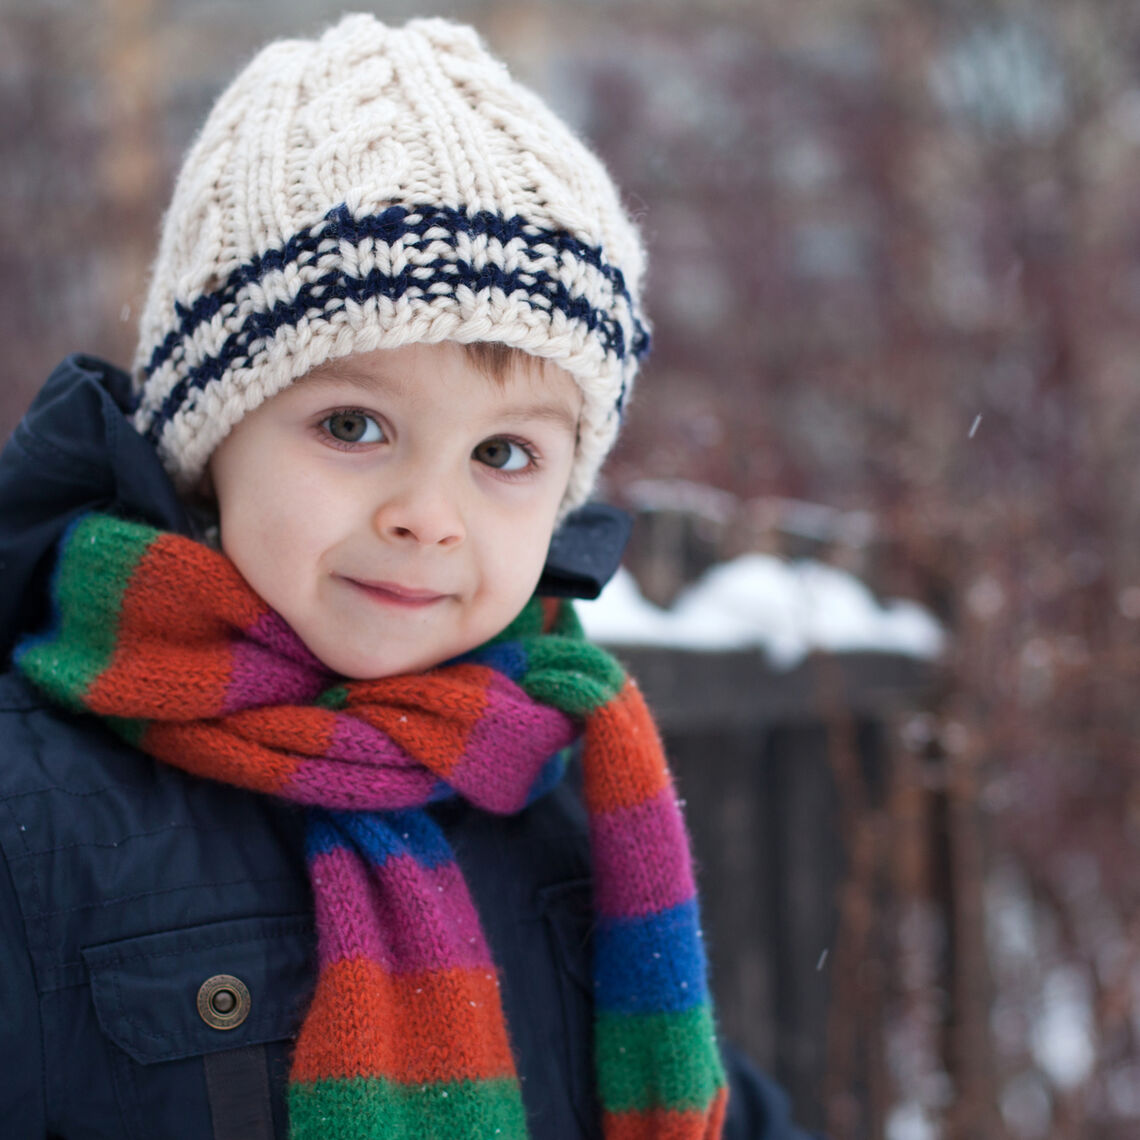 Young boy dressed in winter hat, scarf, and coat, outdoors smiling at the camera